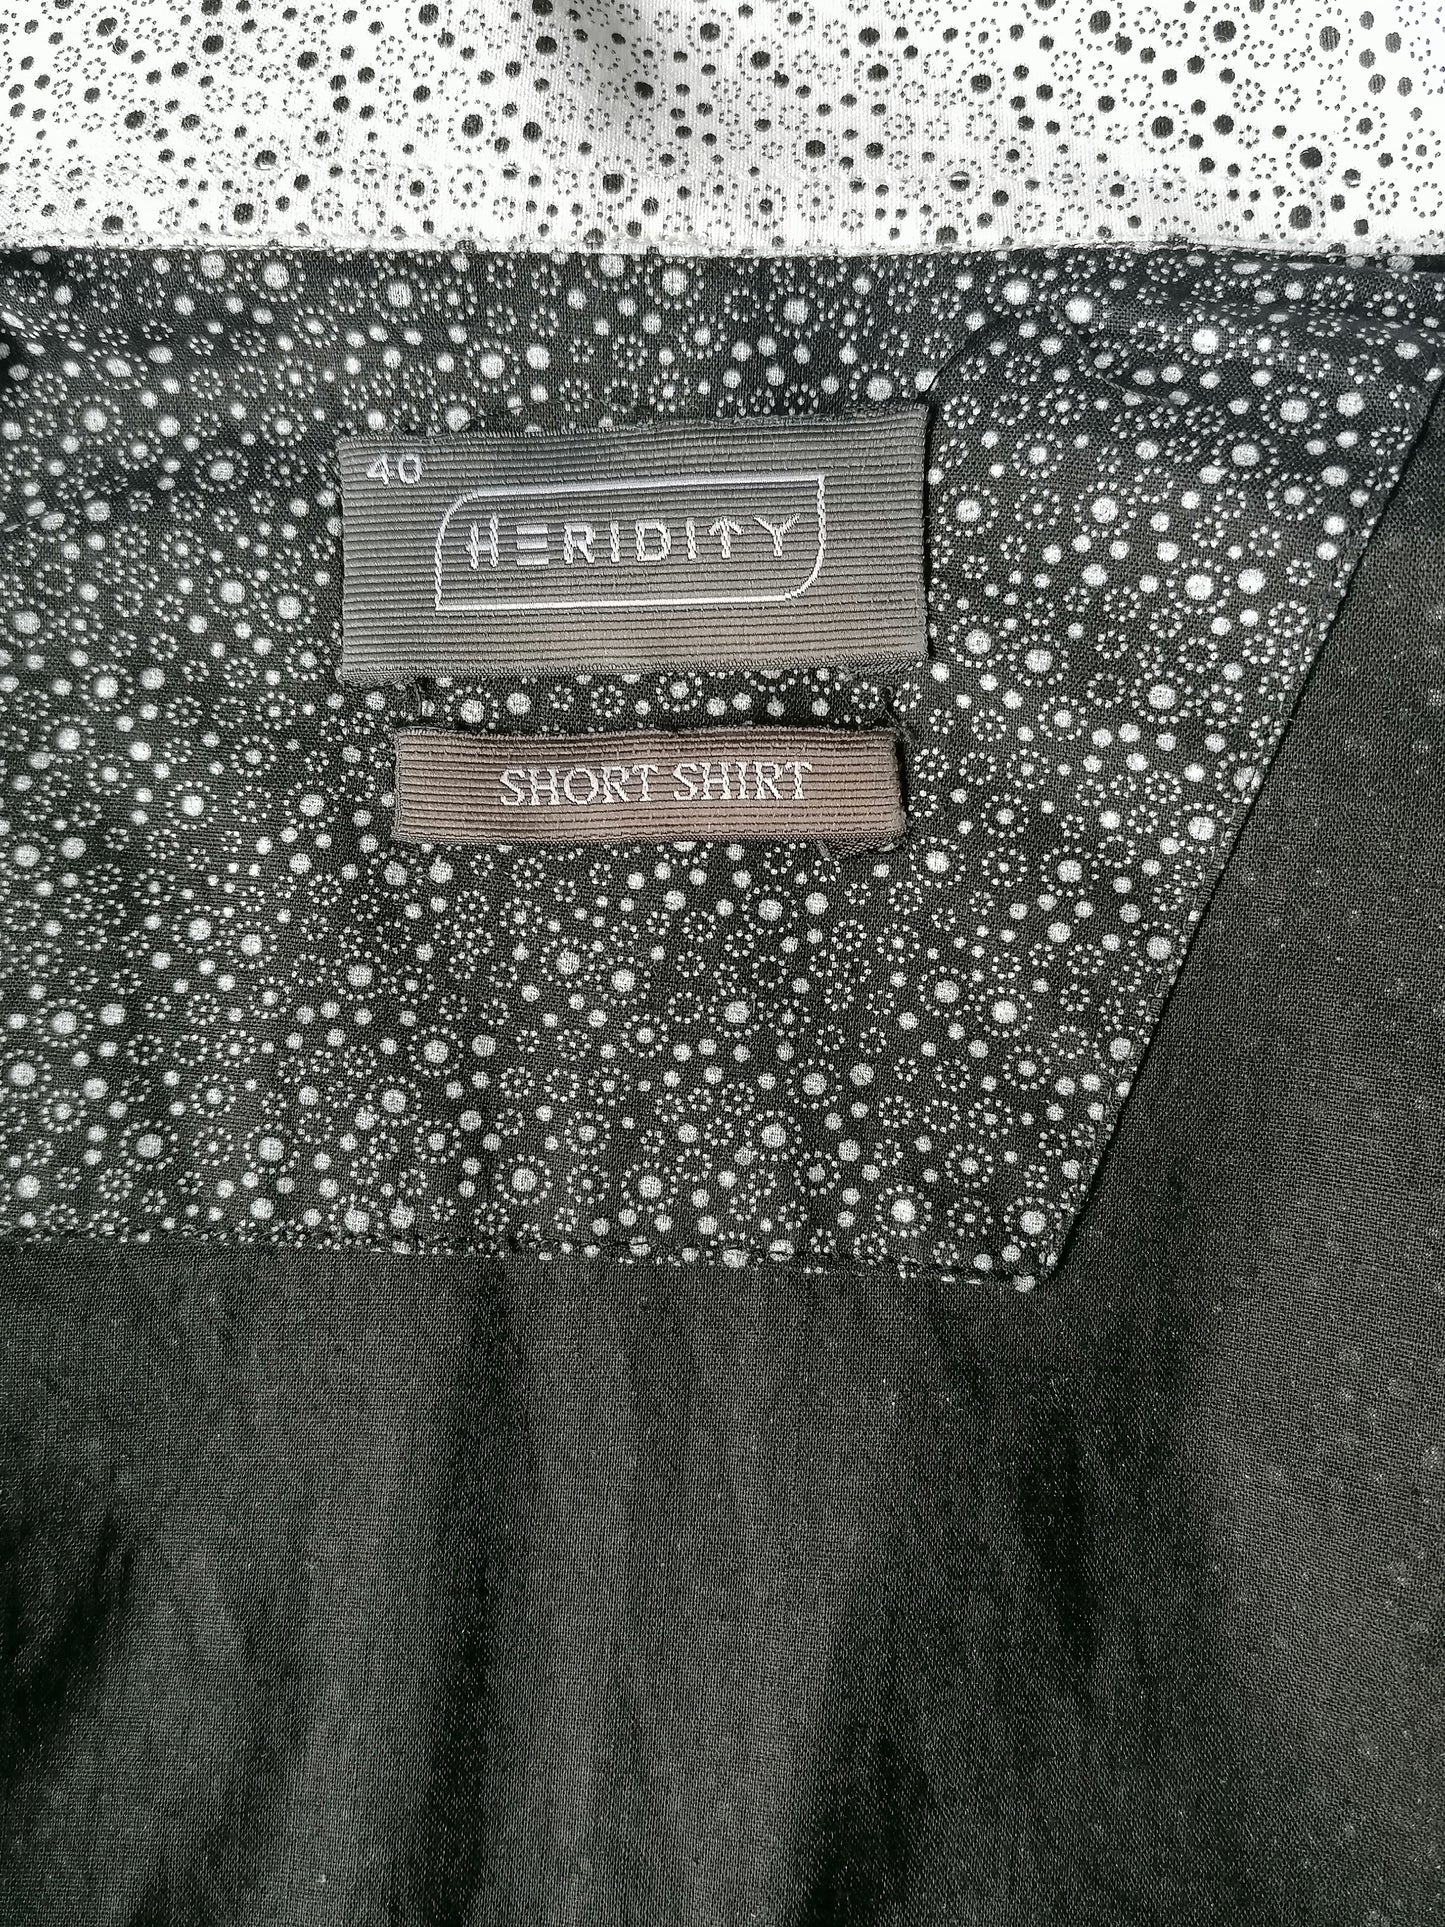 Vintage Heridity Shirt. Black and white print with separate applications. Size M.